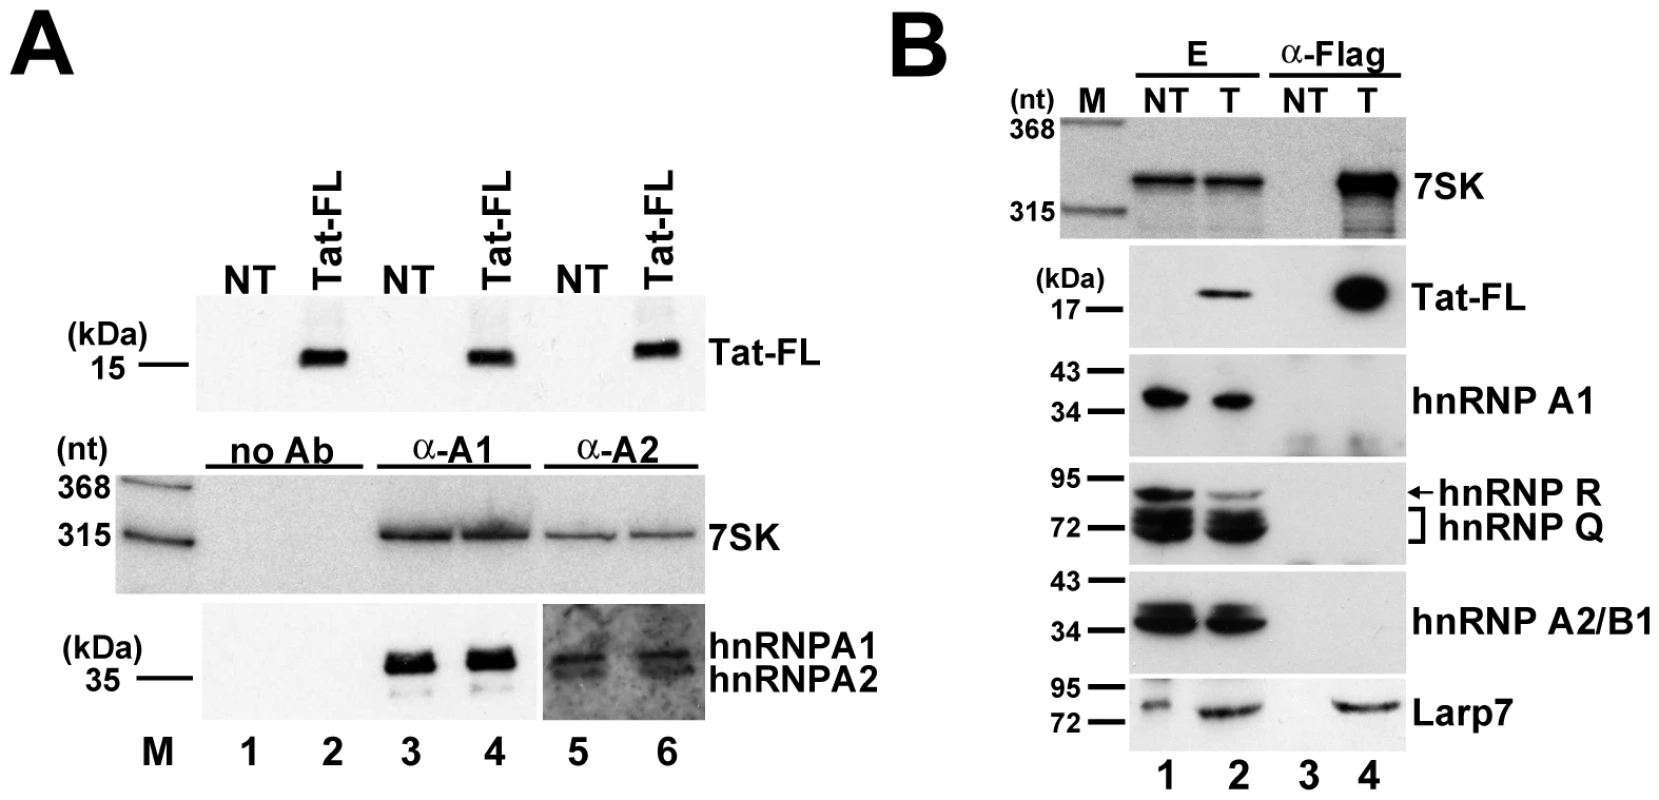 The 7SK/Tat snRNP does not interact with hnRNP proteins.